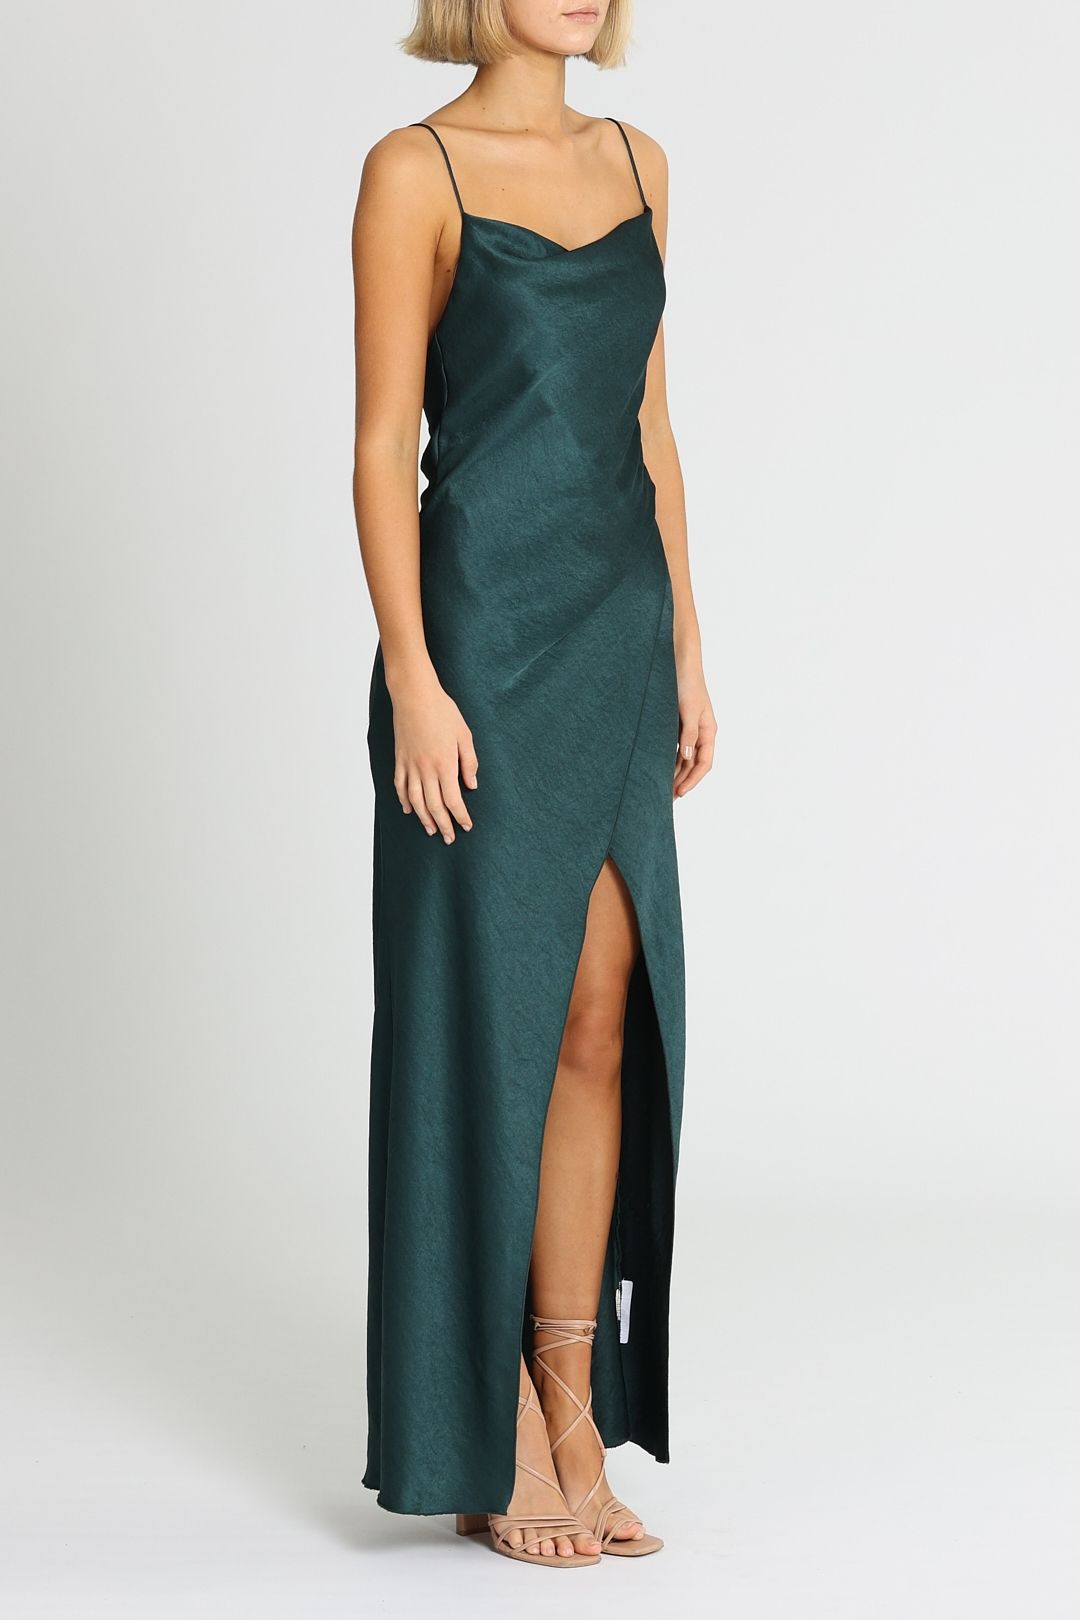 Camilla and Marc Bowery Slip Dress Fitzgerald Green Cowl